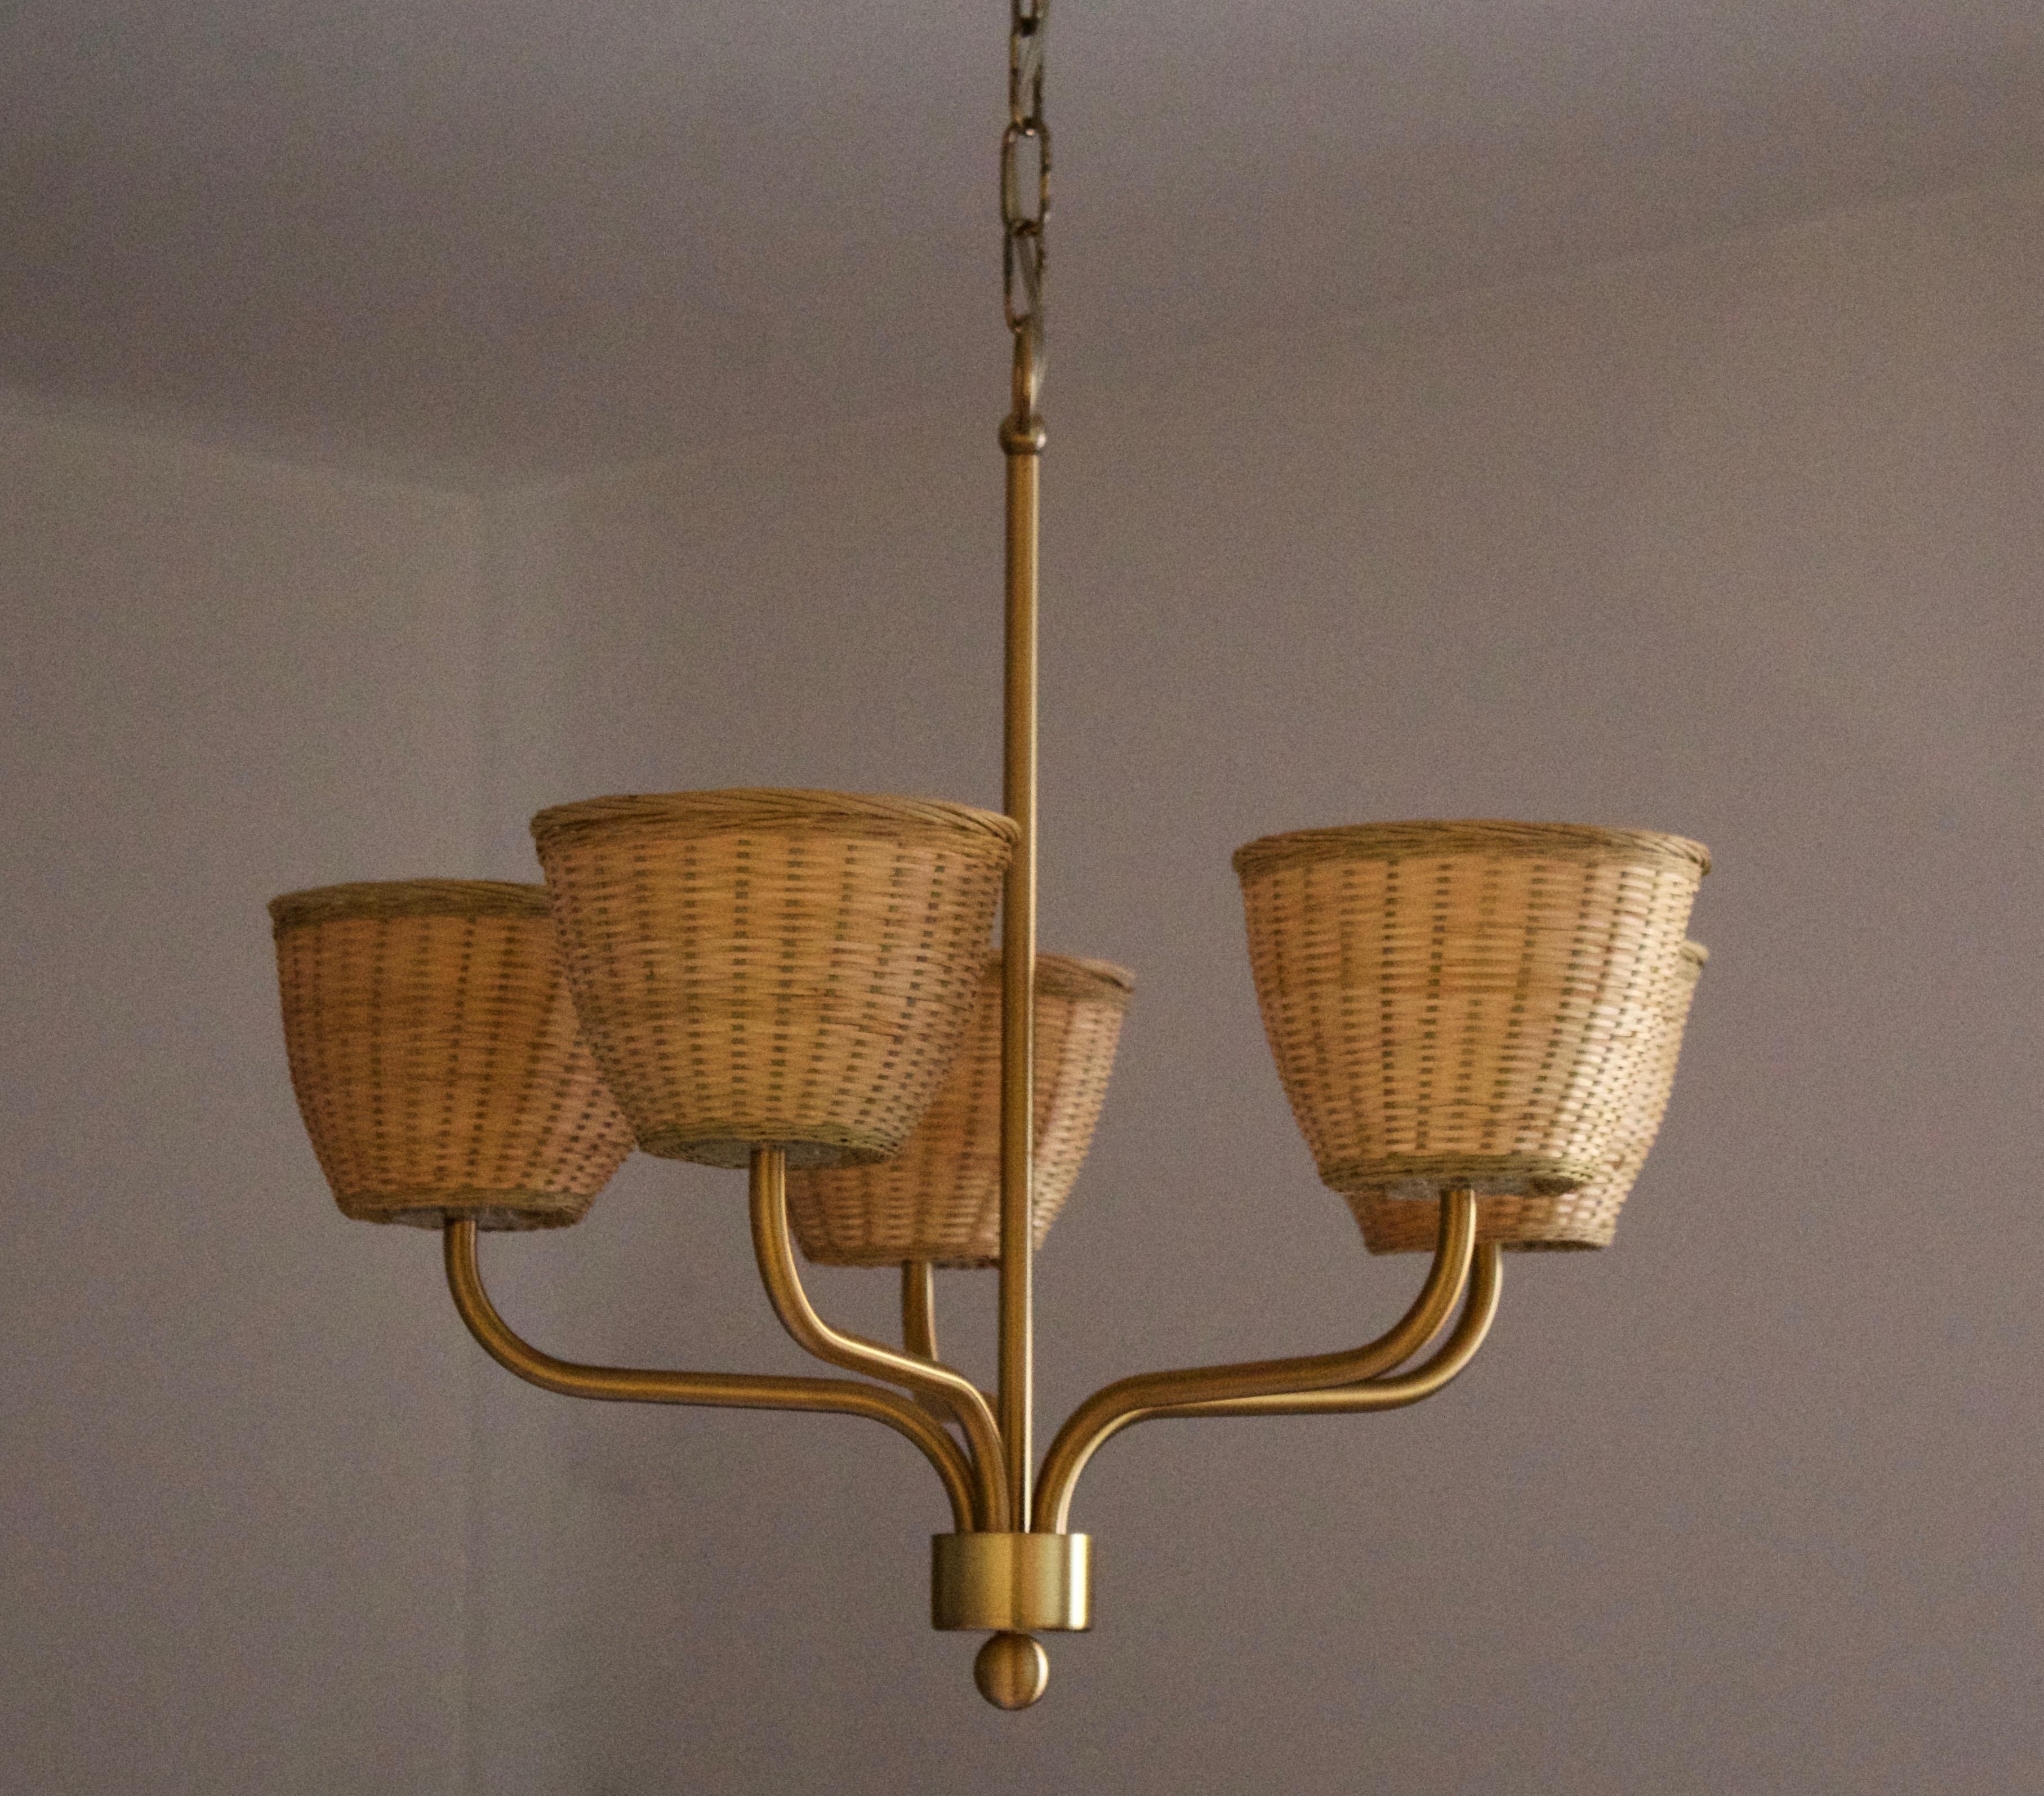 A chandelier light. By Luxus, Sweden, 1970s. In brass. Assorted vintage rattan lampshades.

Five-armed and features transparent plastic sockets. Stated height includes full drop.

Other designers of the period include Axel Einar Hjorth, Roland